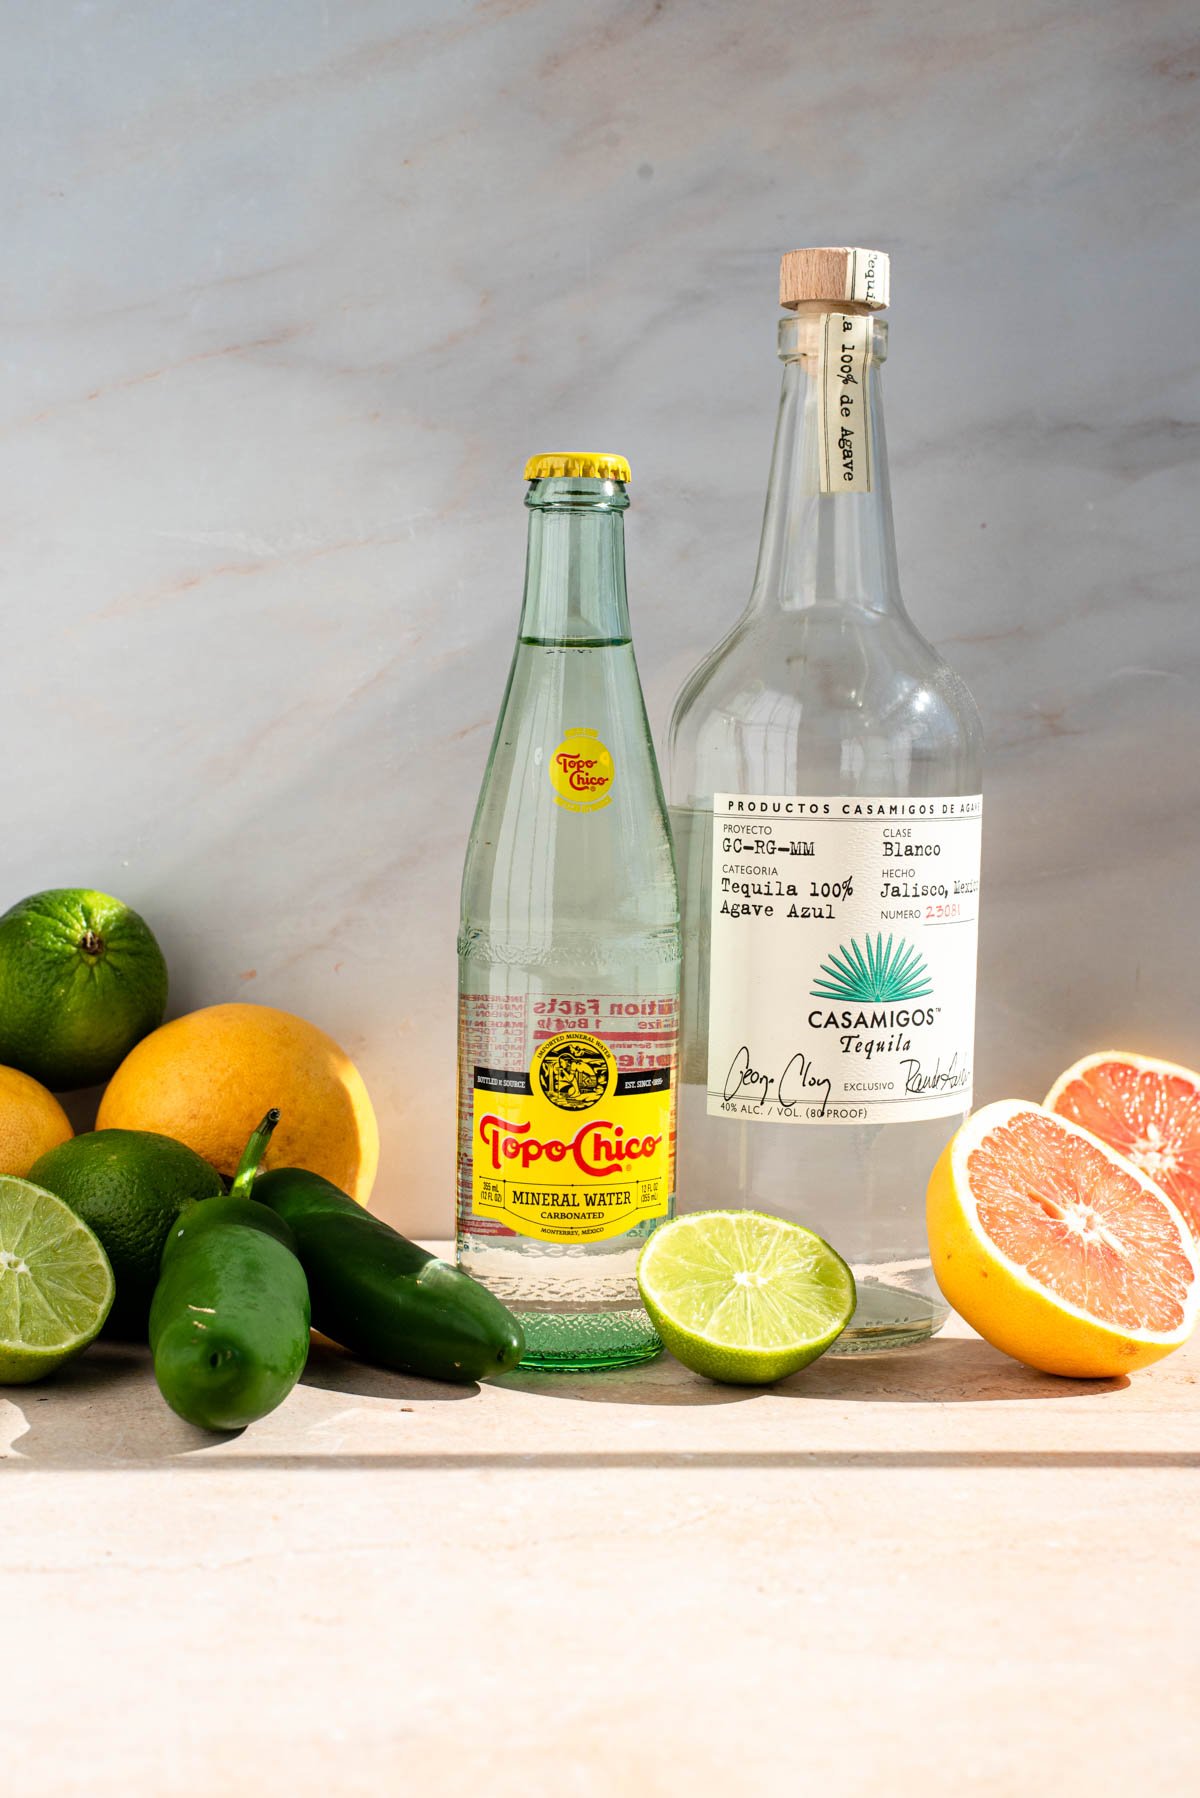 Tequila, Topo-Chico, grapefruit, lime, jalapeno on a brown table.